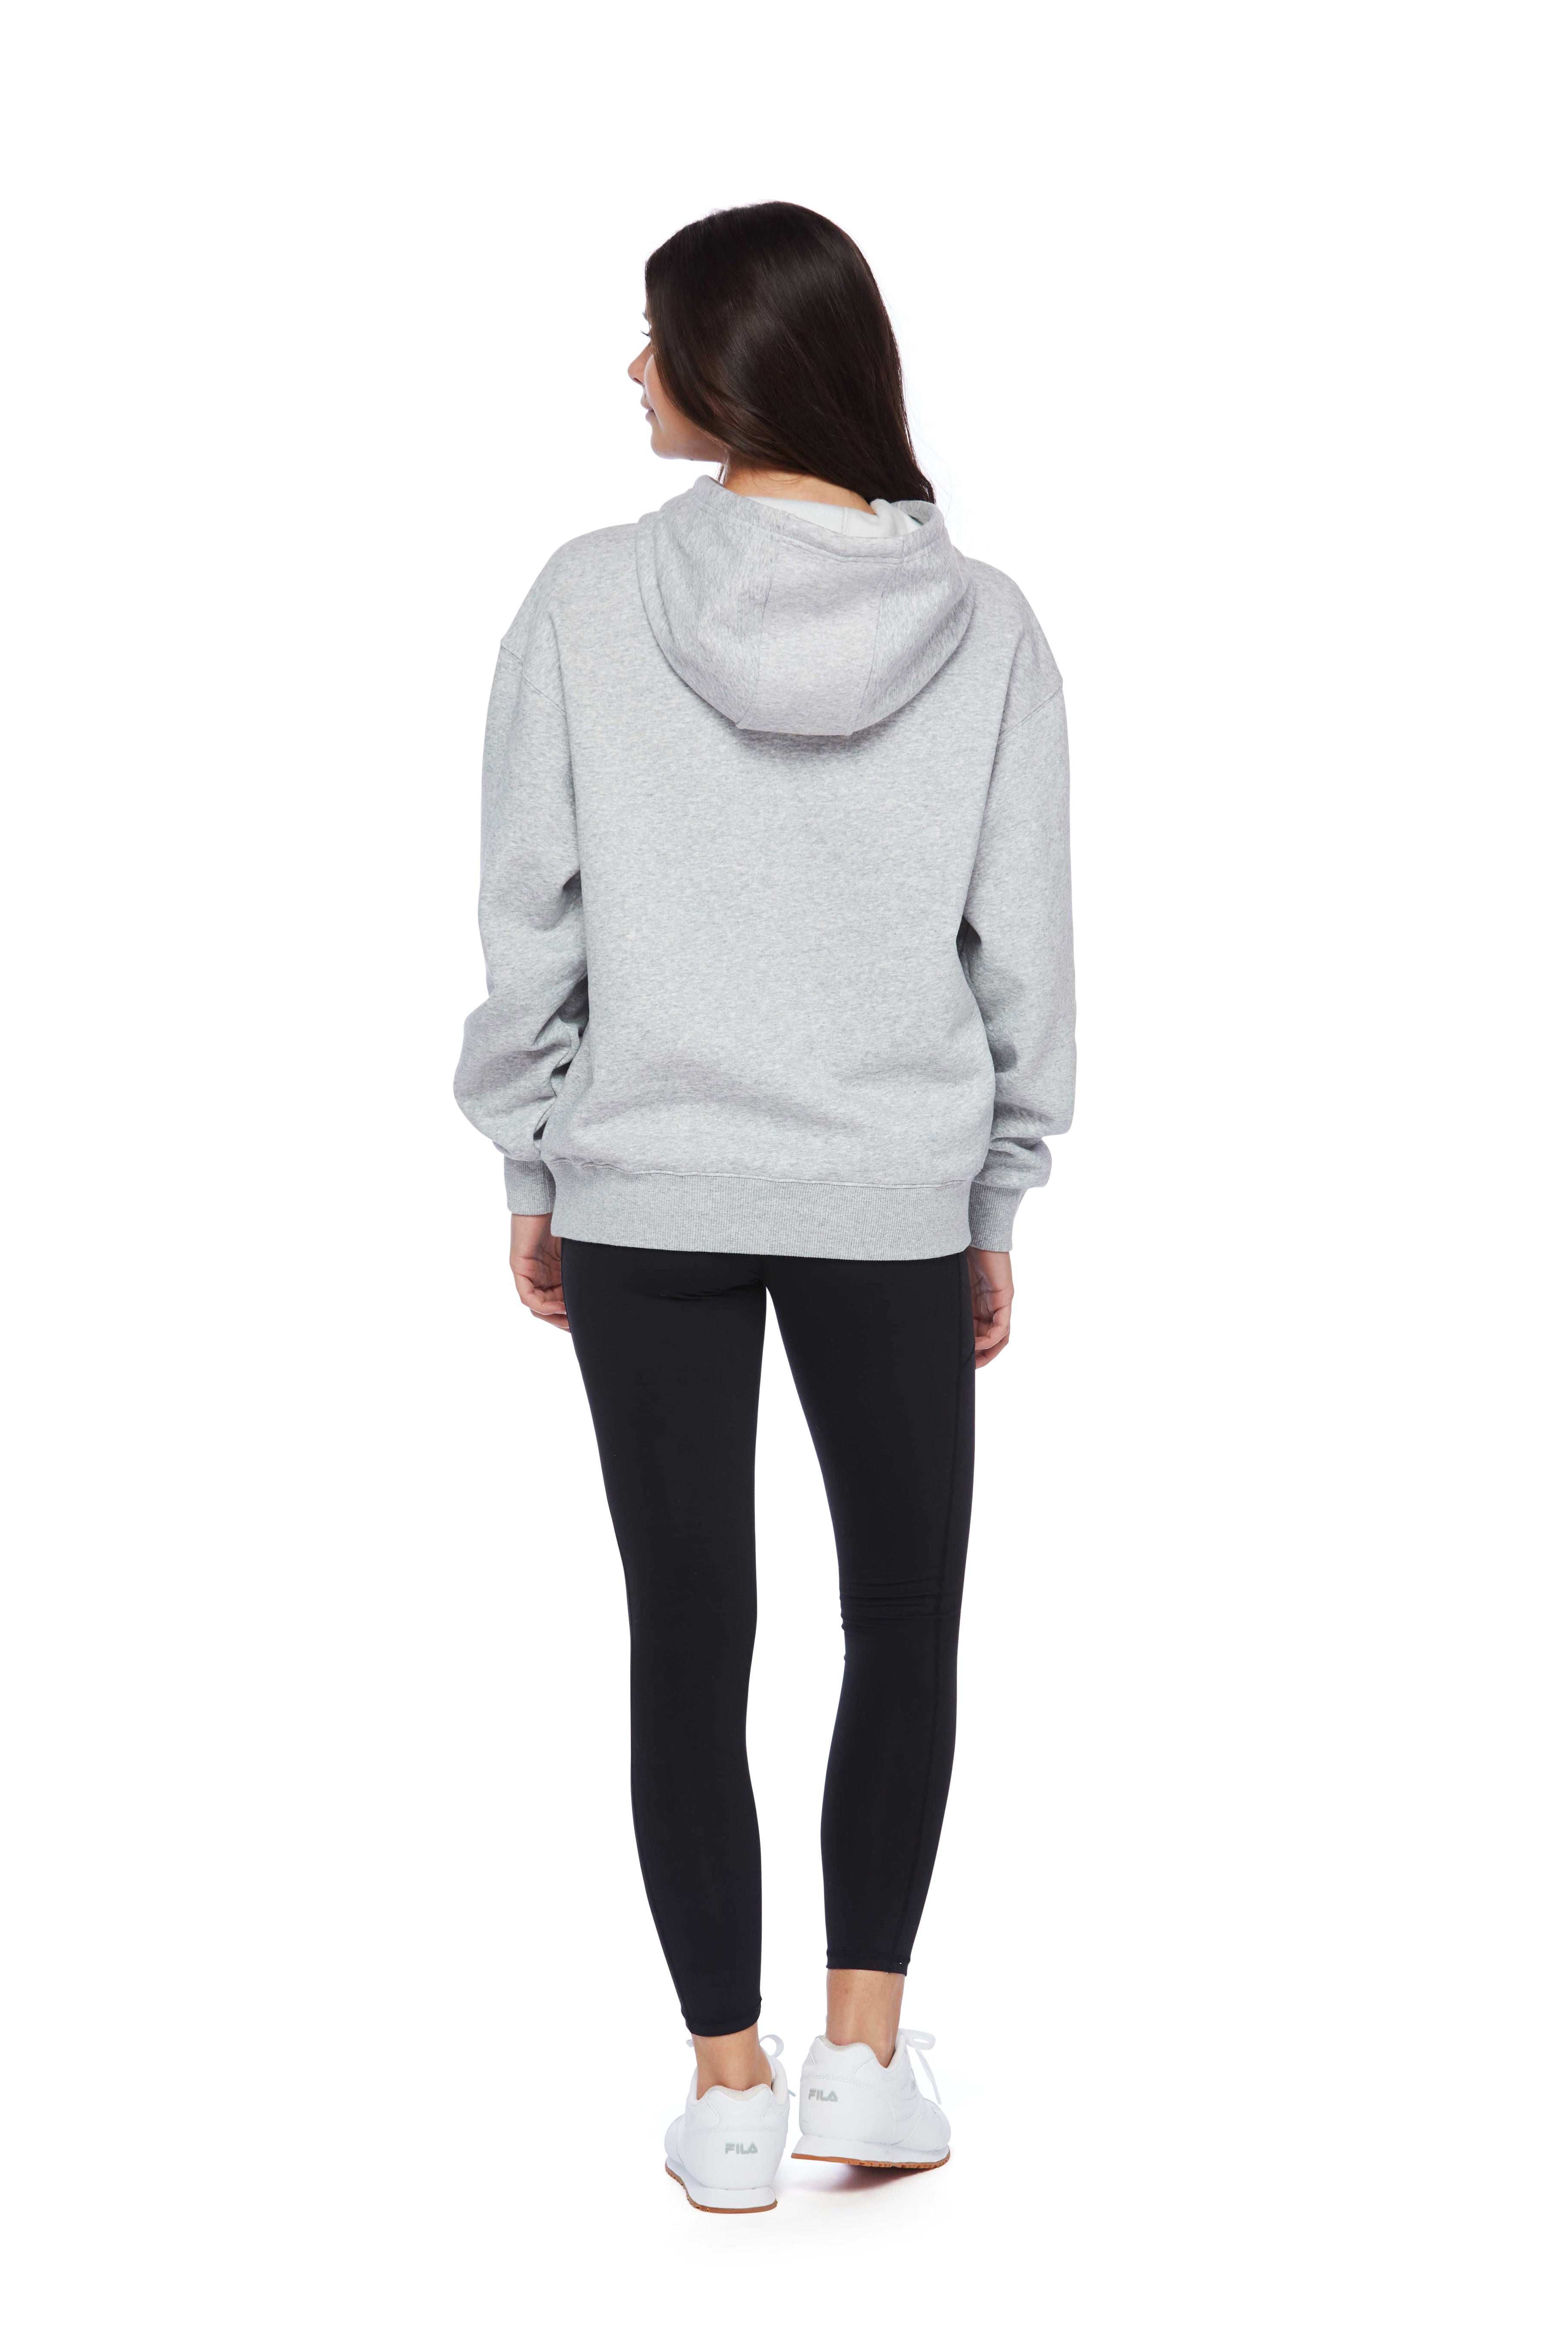 Chloe Relaxed Fit Hoodie in Classic Grey from Lazypants - always a great buy at a reasonable price.